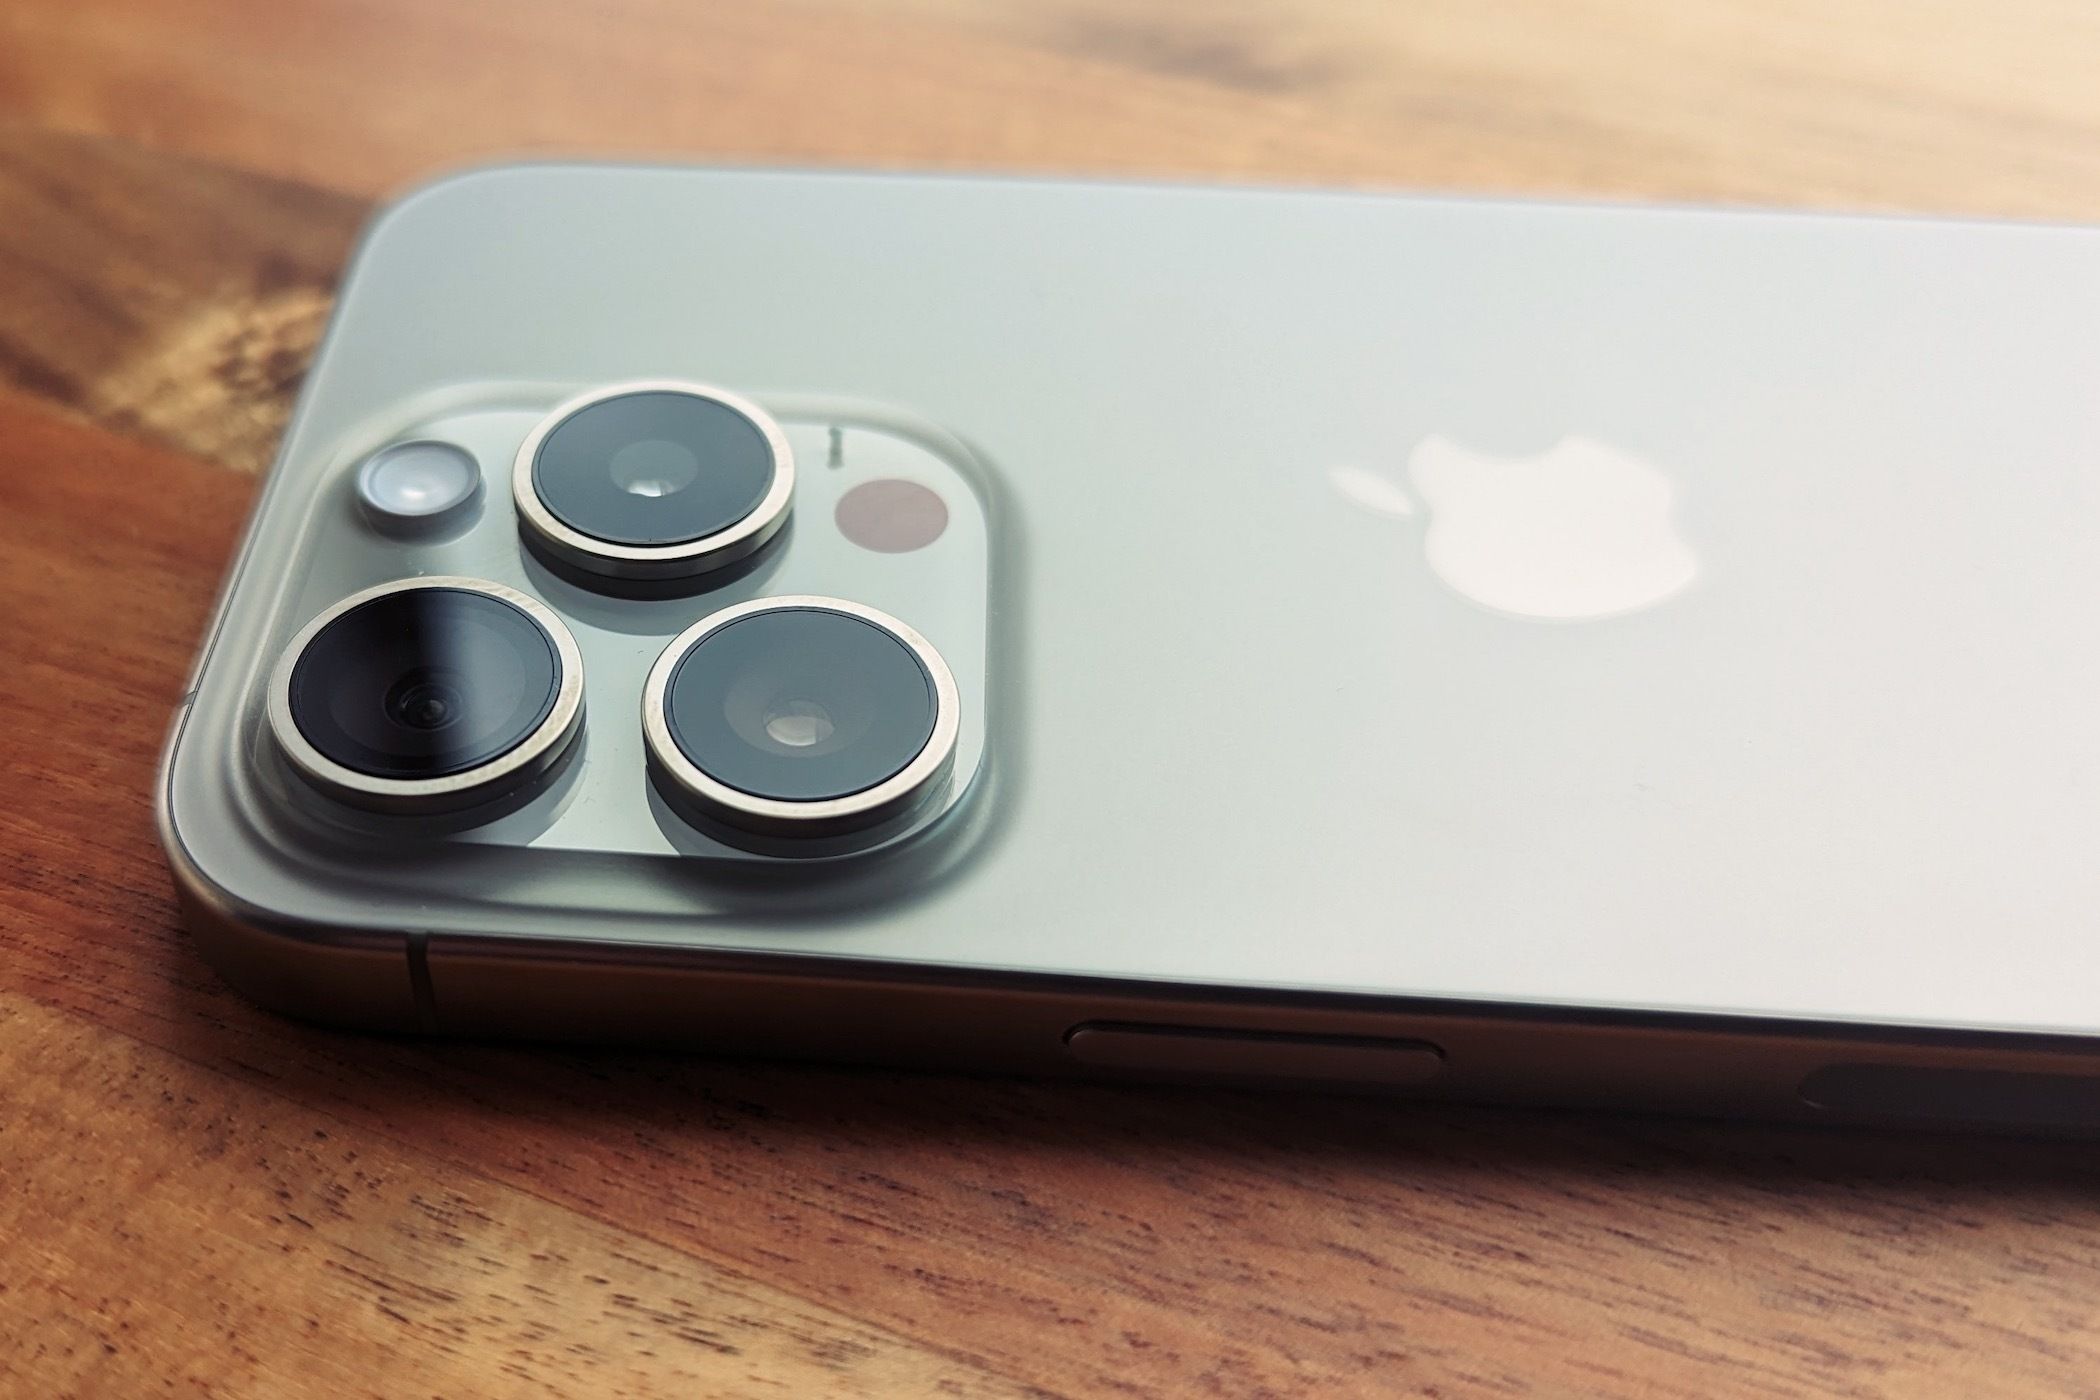 The Apple iPhone 15 Pro's three lens camera system